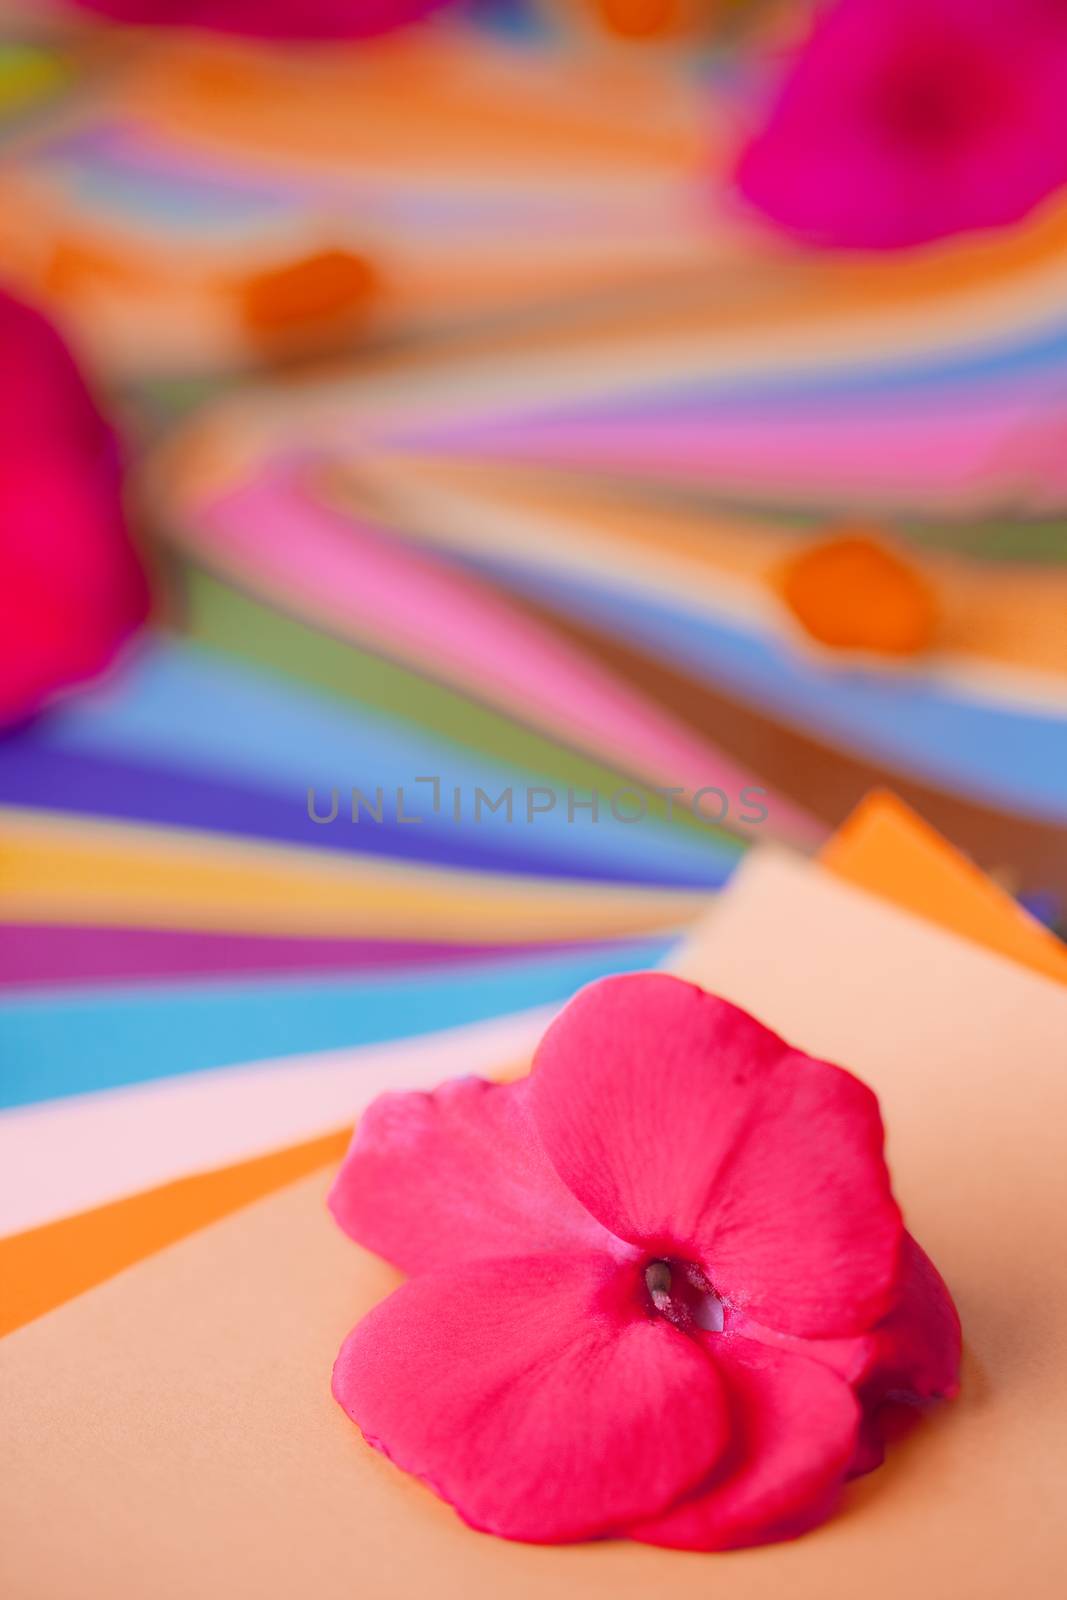 Red and pink flowers on layers of colorful papers by jarenwicklund